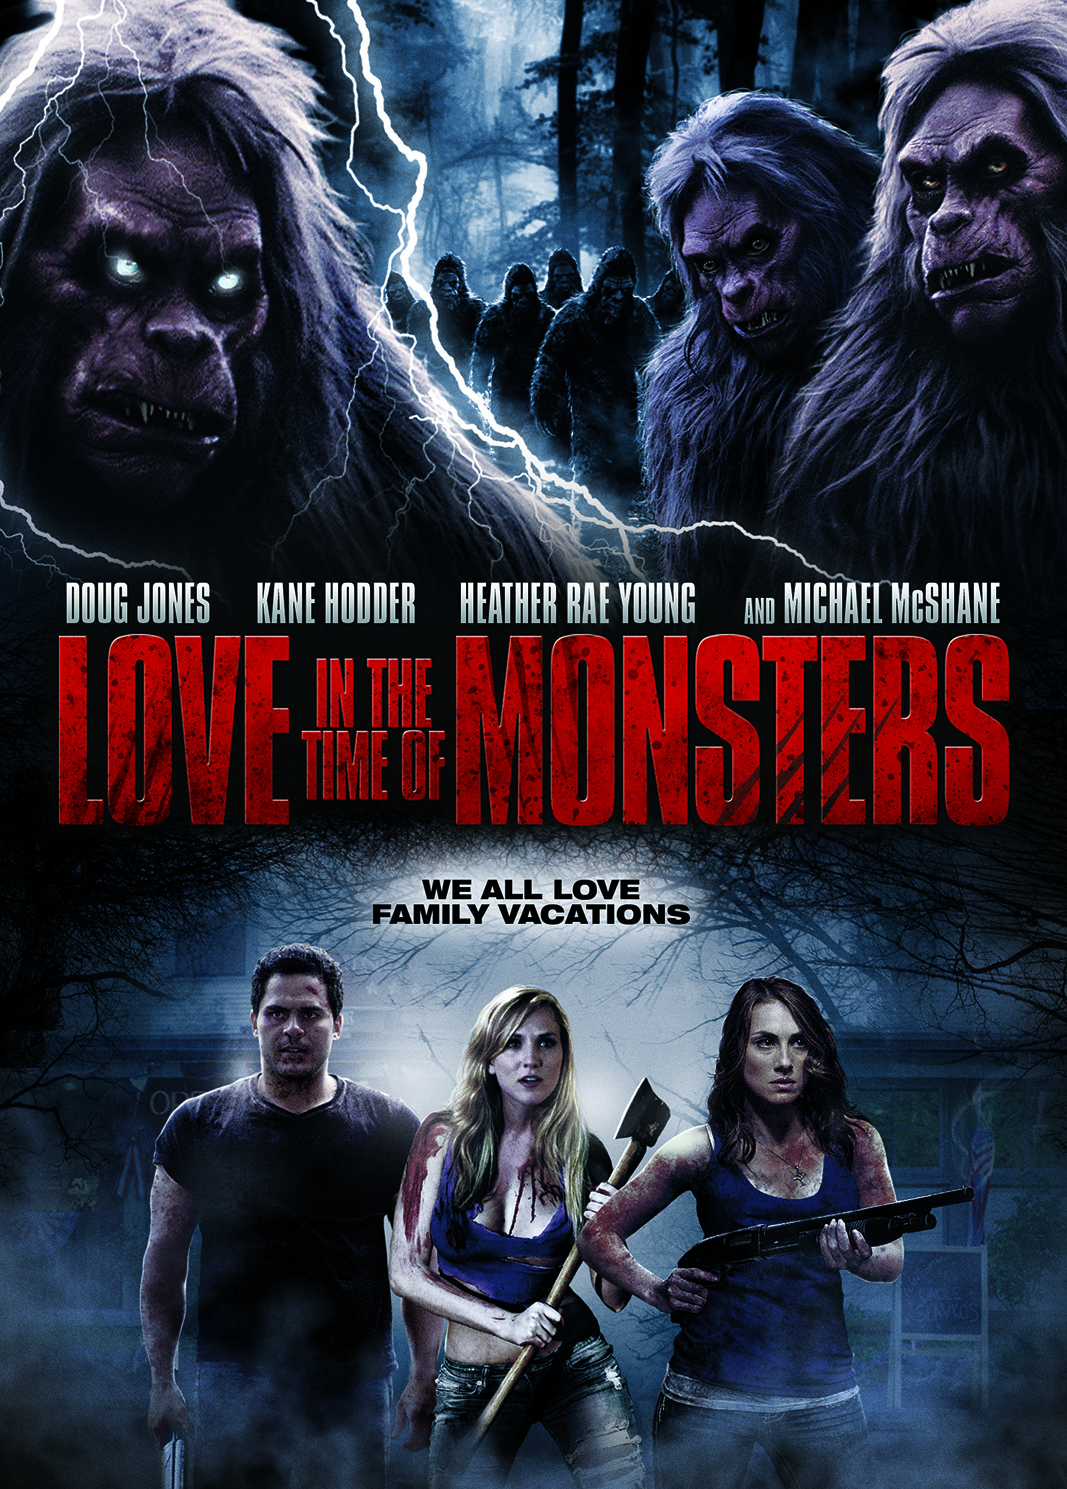 Love-in-the-time-of-monsters